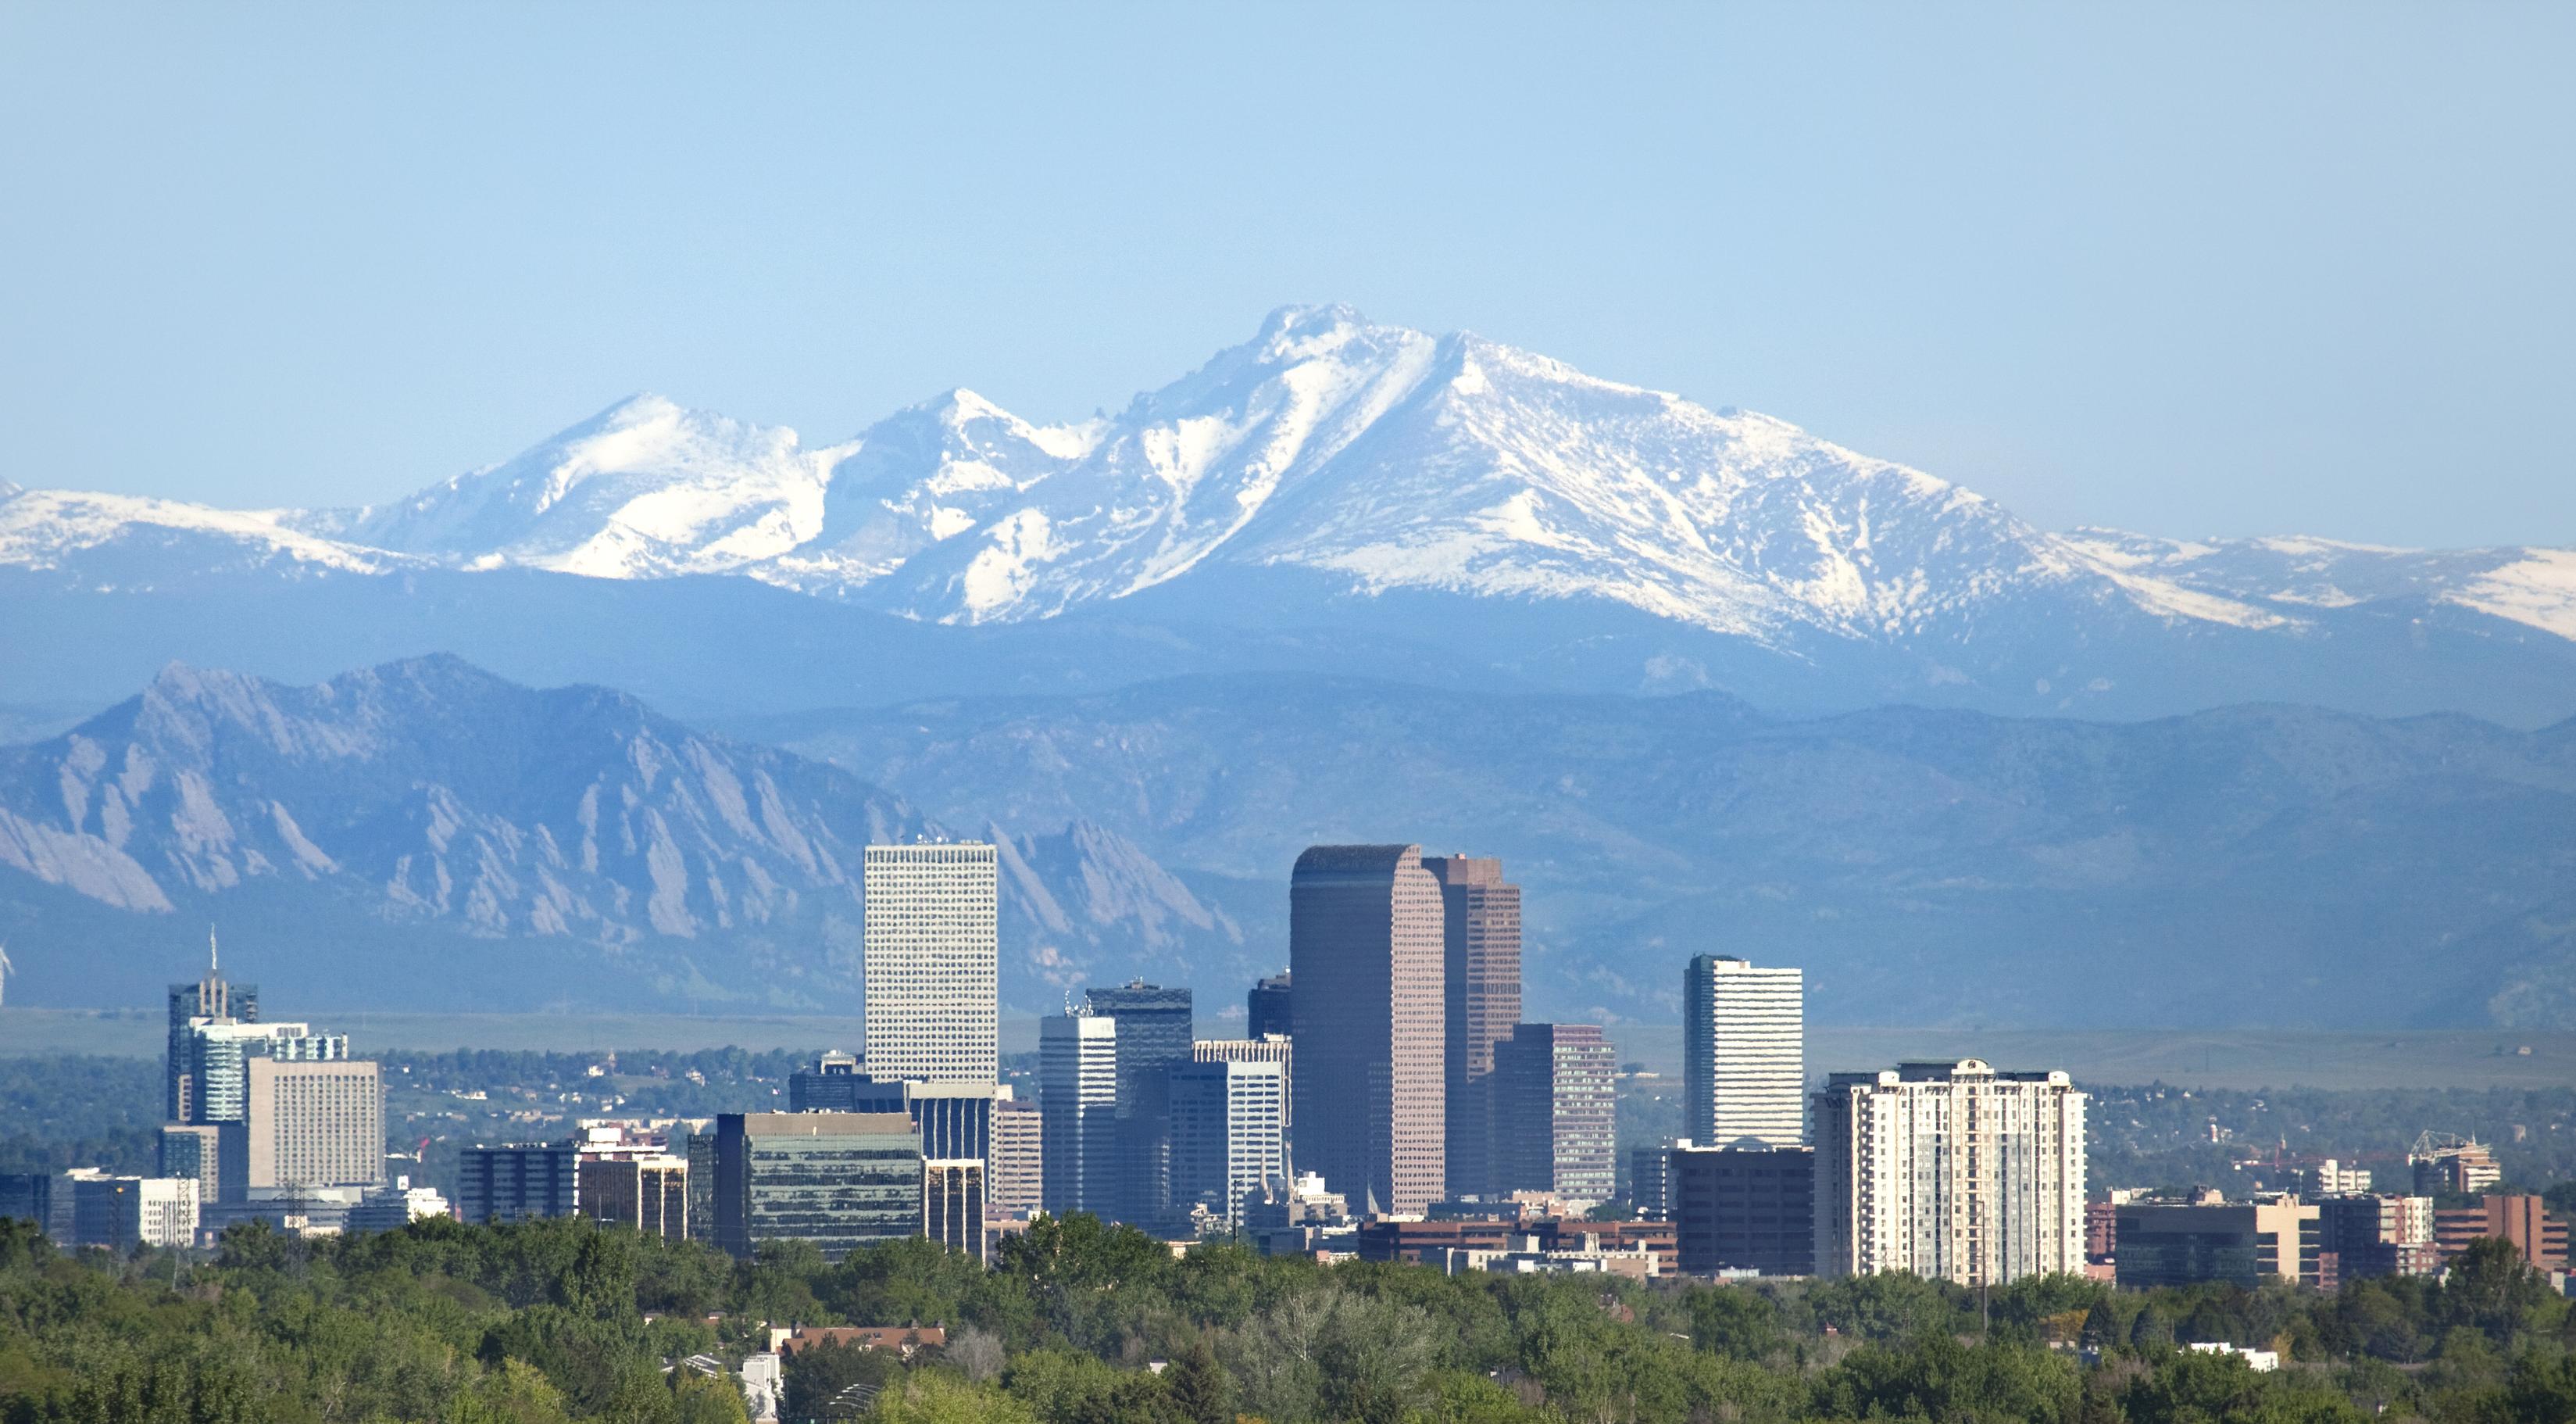 Denver, Colorado where BMO Harris Bank's new Commercial Banking office has opened